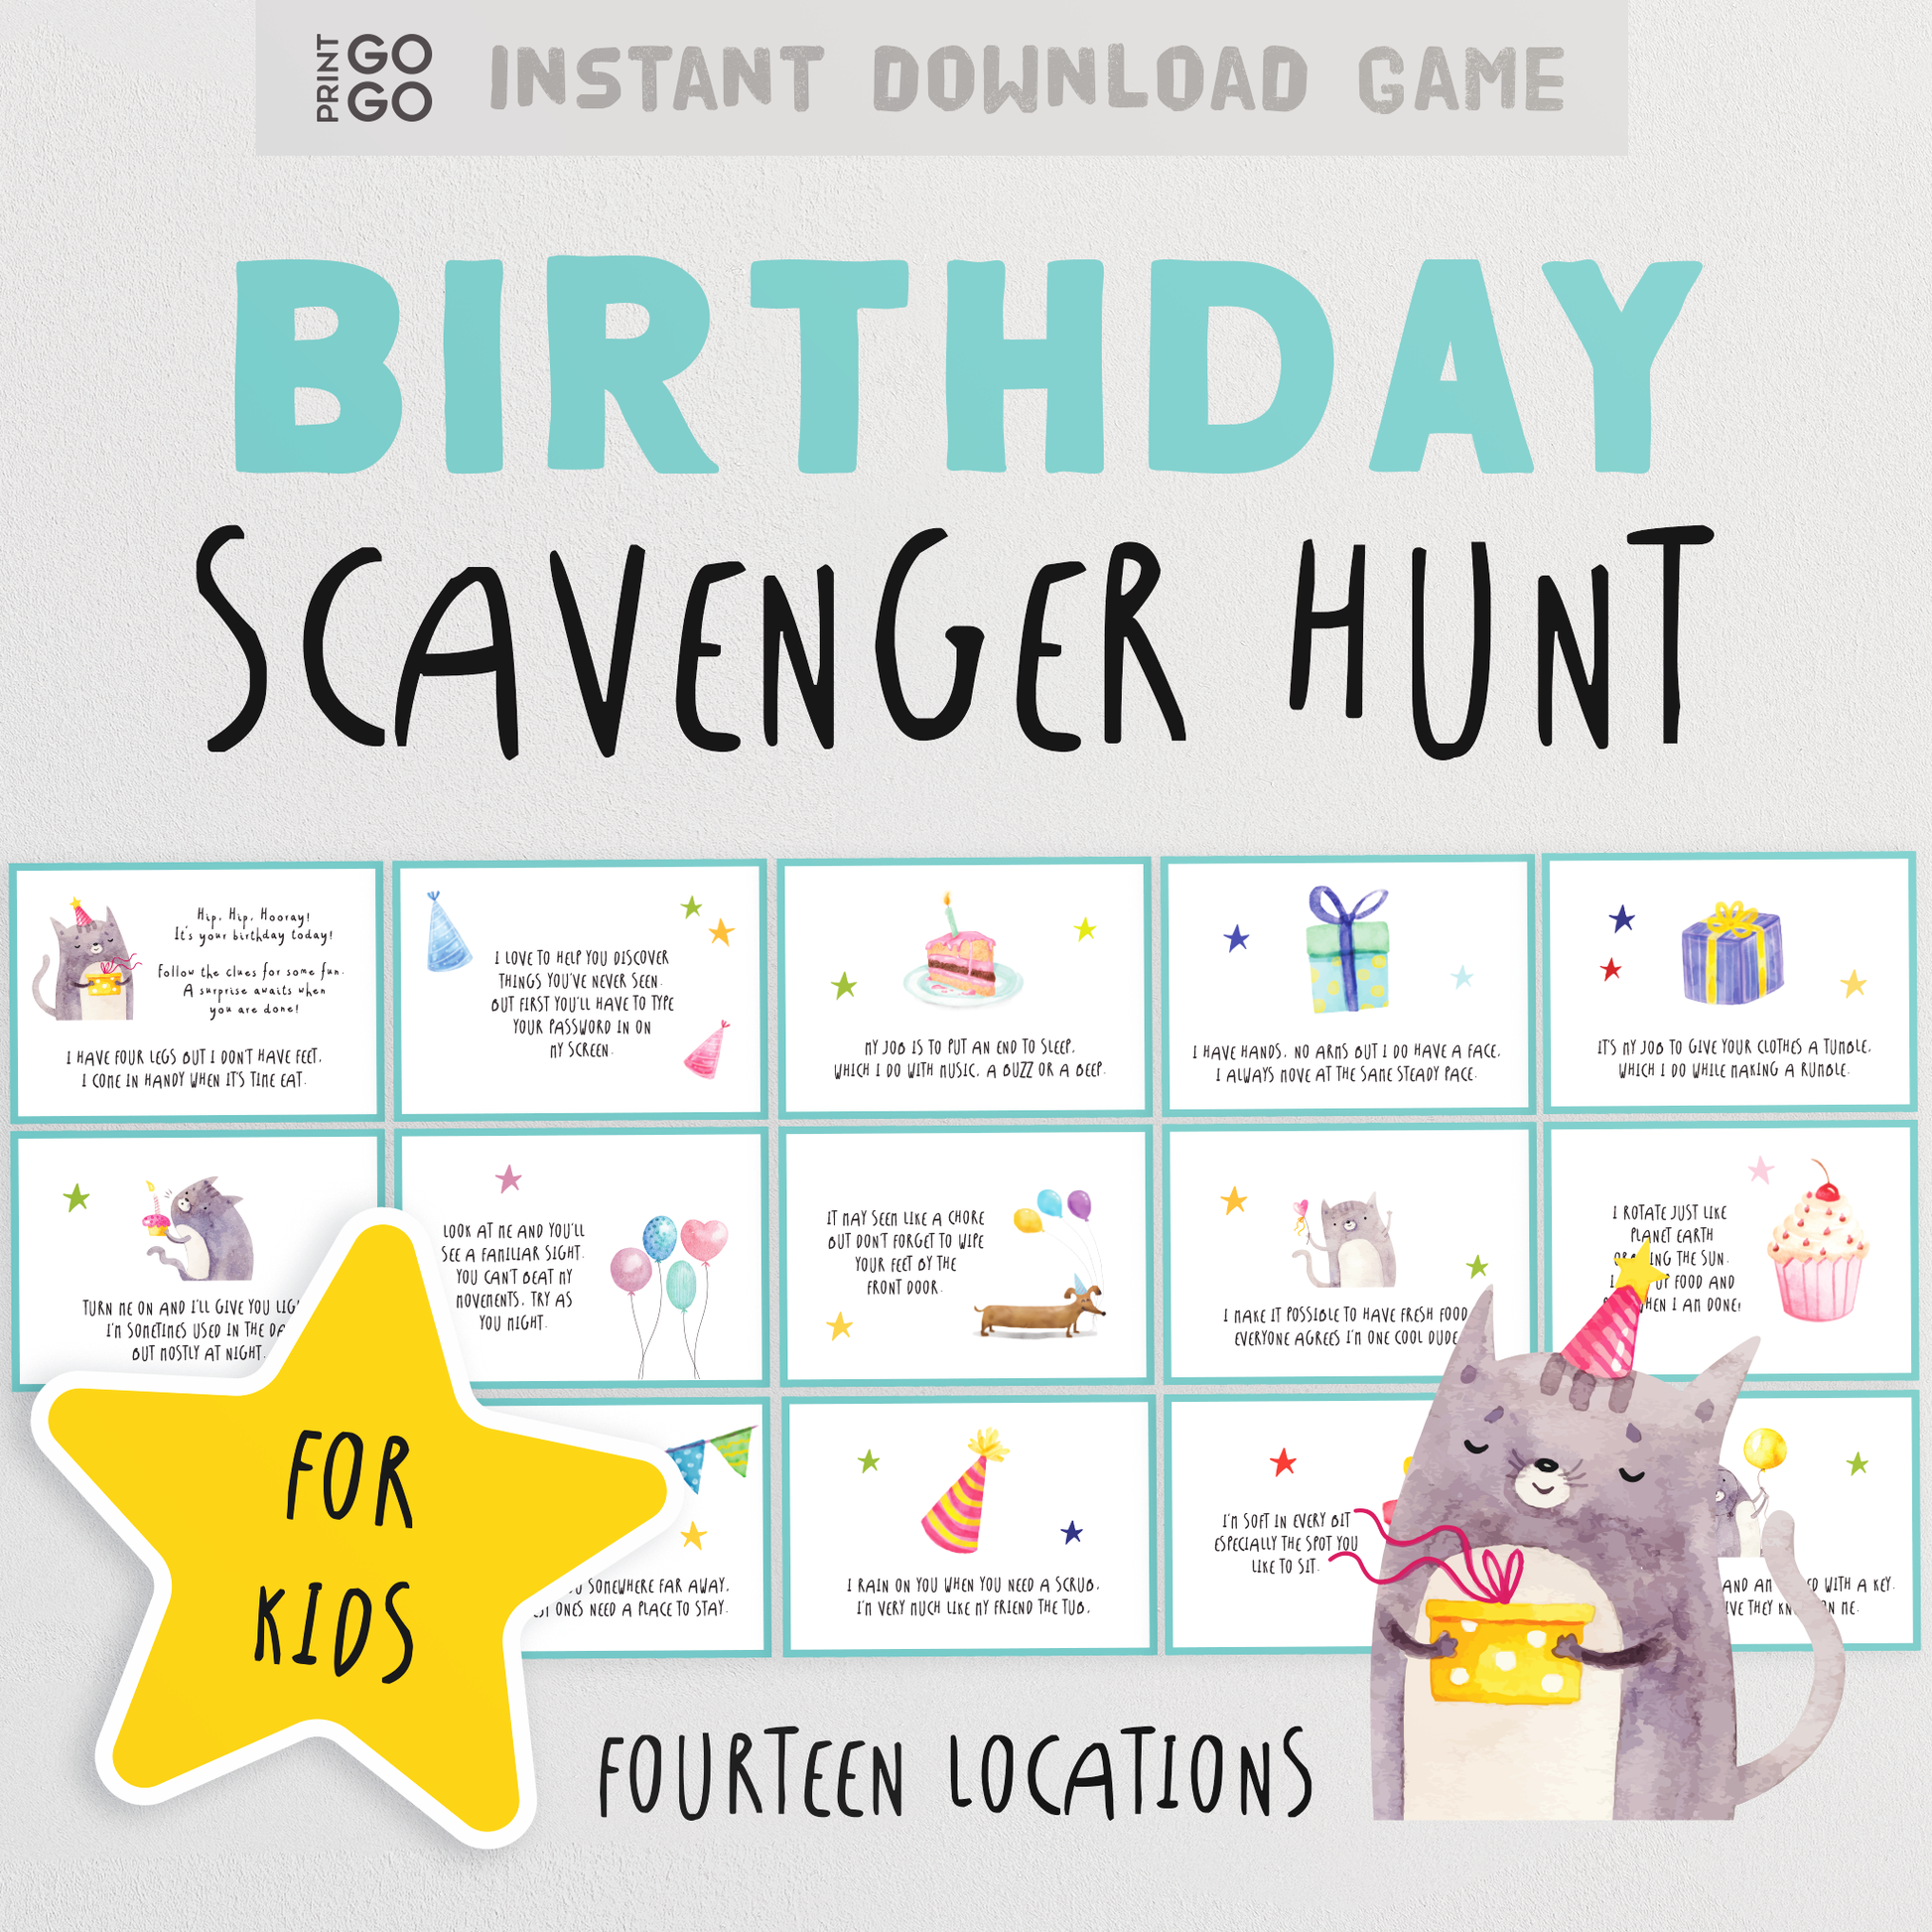 Birthday Scavenger Hunt - A Fun Race of Solving Clues and Finding Rewards for Kids